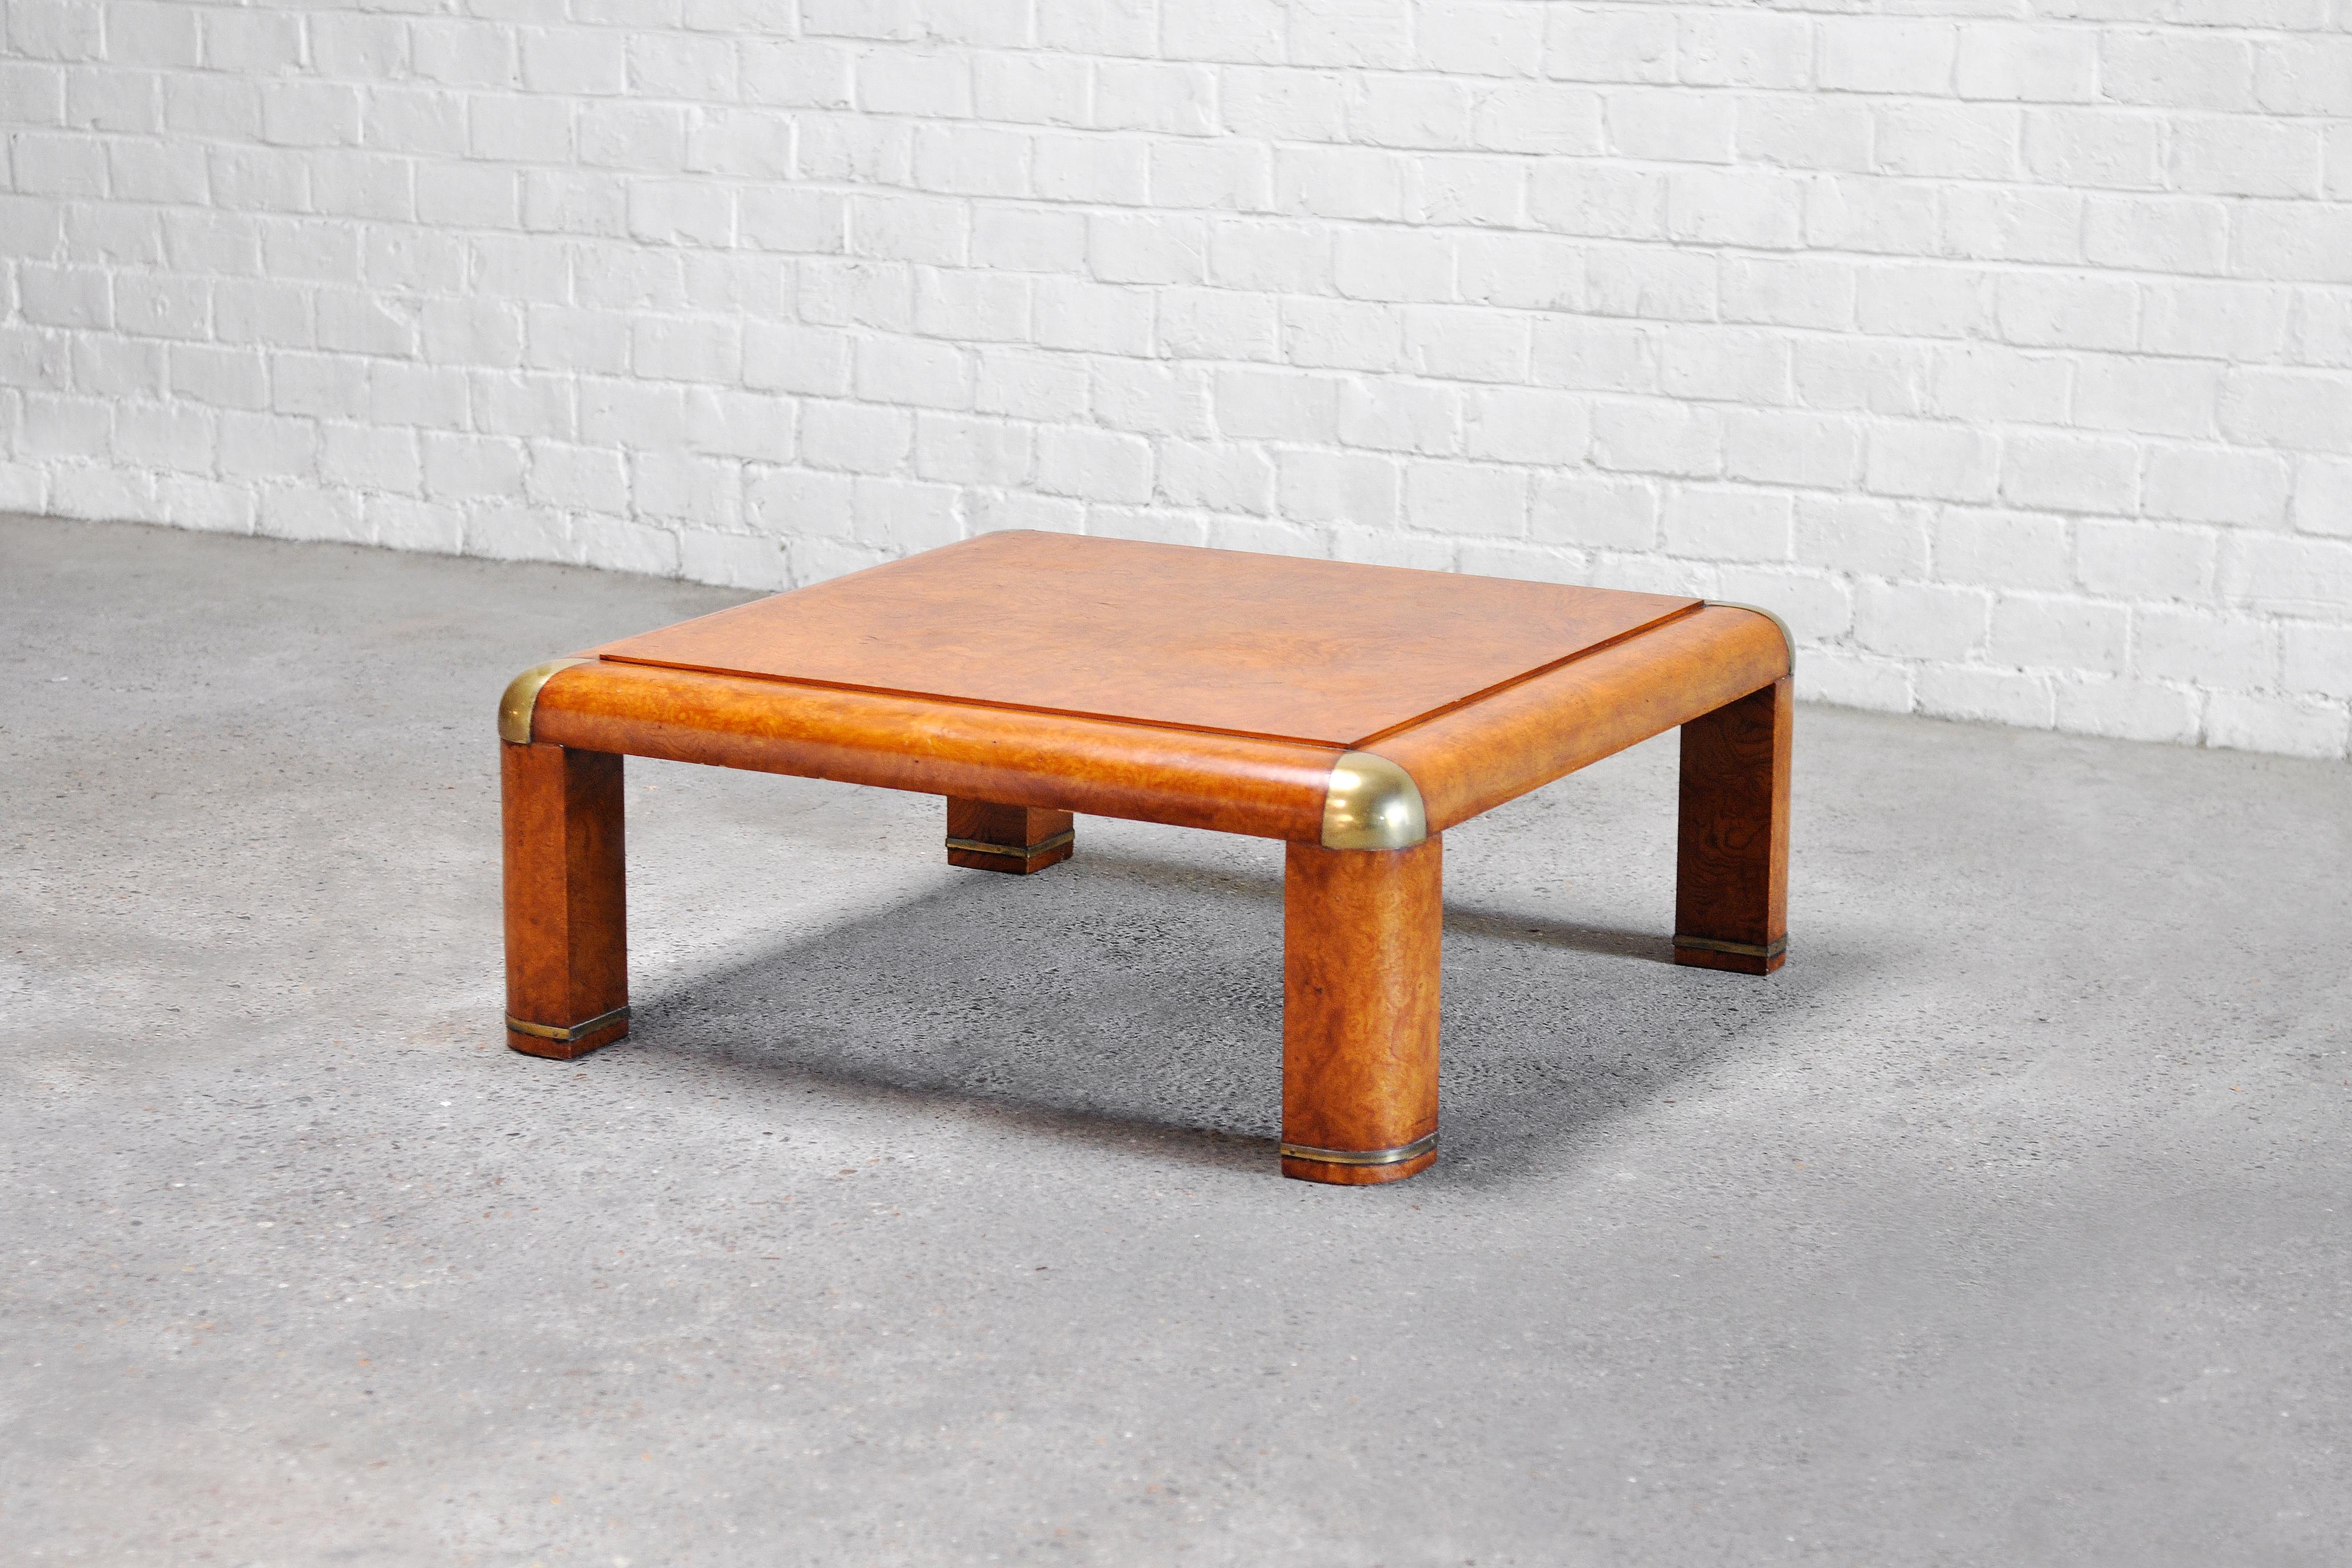 A unique burl wood coffee table with large brass accents. This table dates to the 1970's and is attributed to Karl Springer due to its typical matching design features. It has a low and playful design finished with thick rounded table legs and